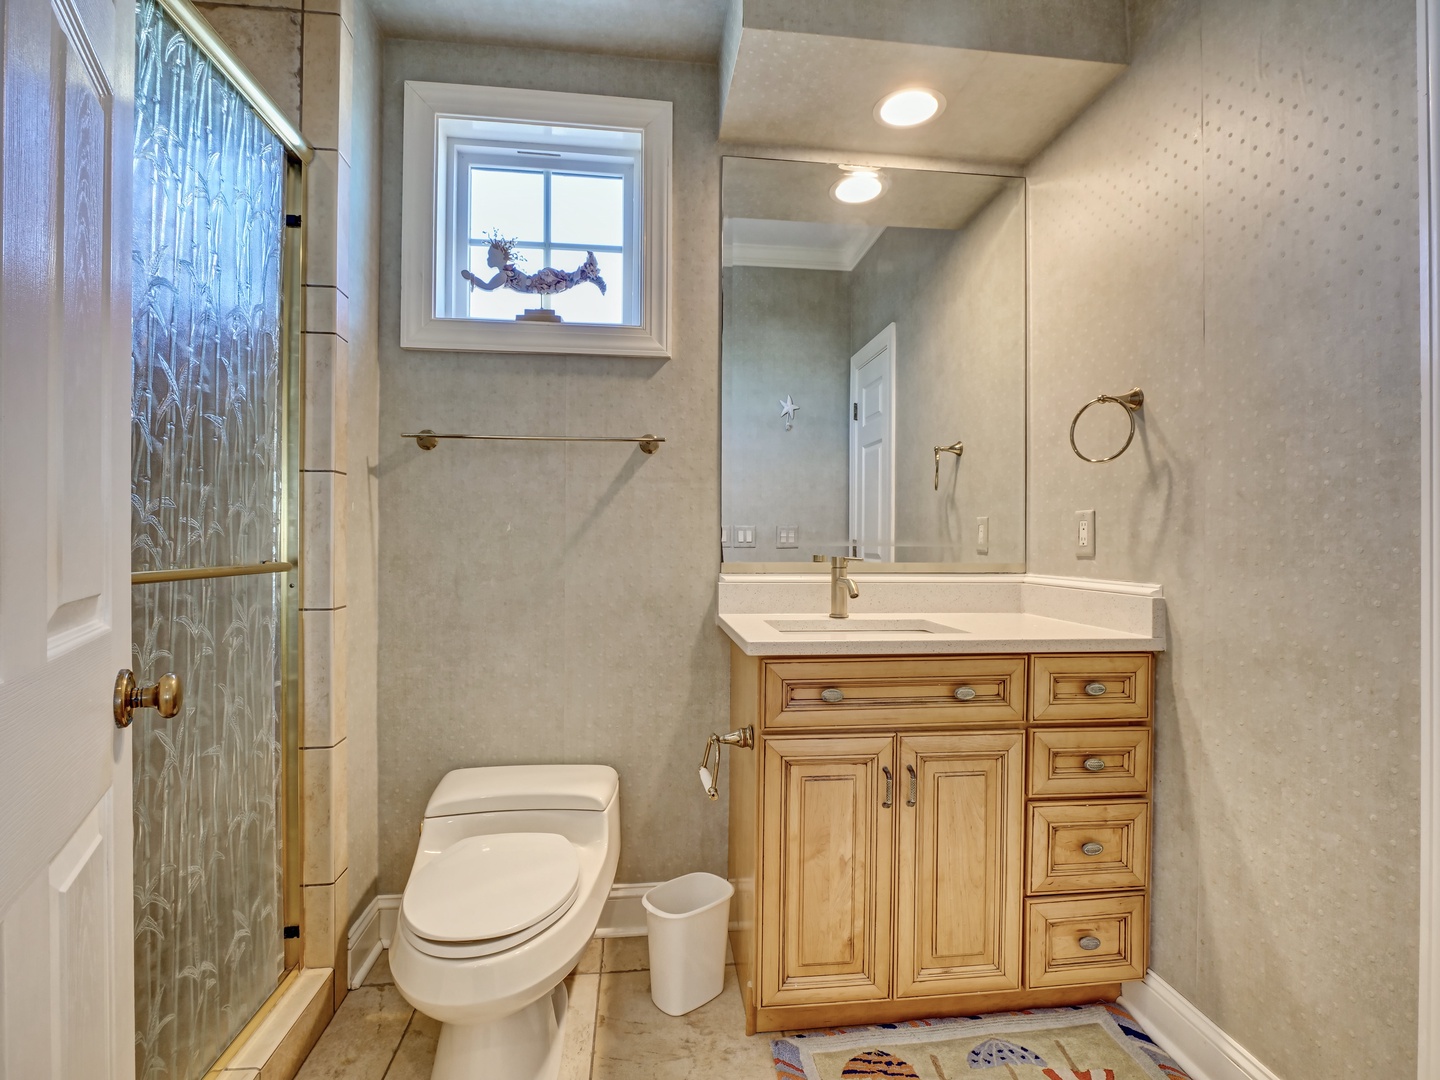 Top floor shared bathroom with a walk-in shower